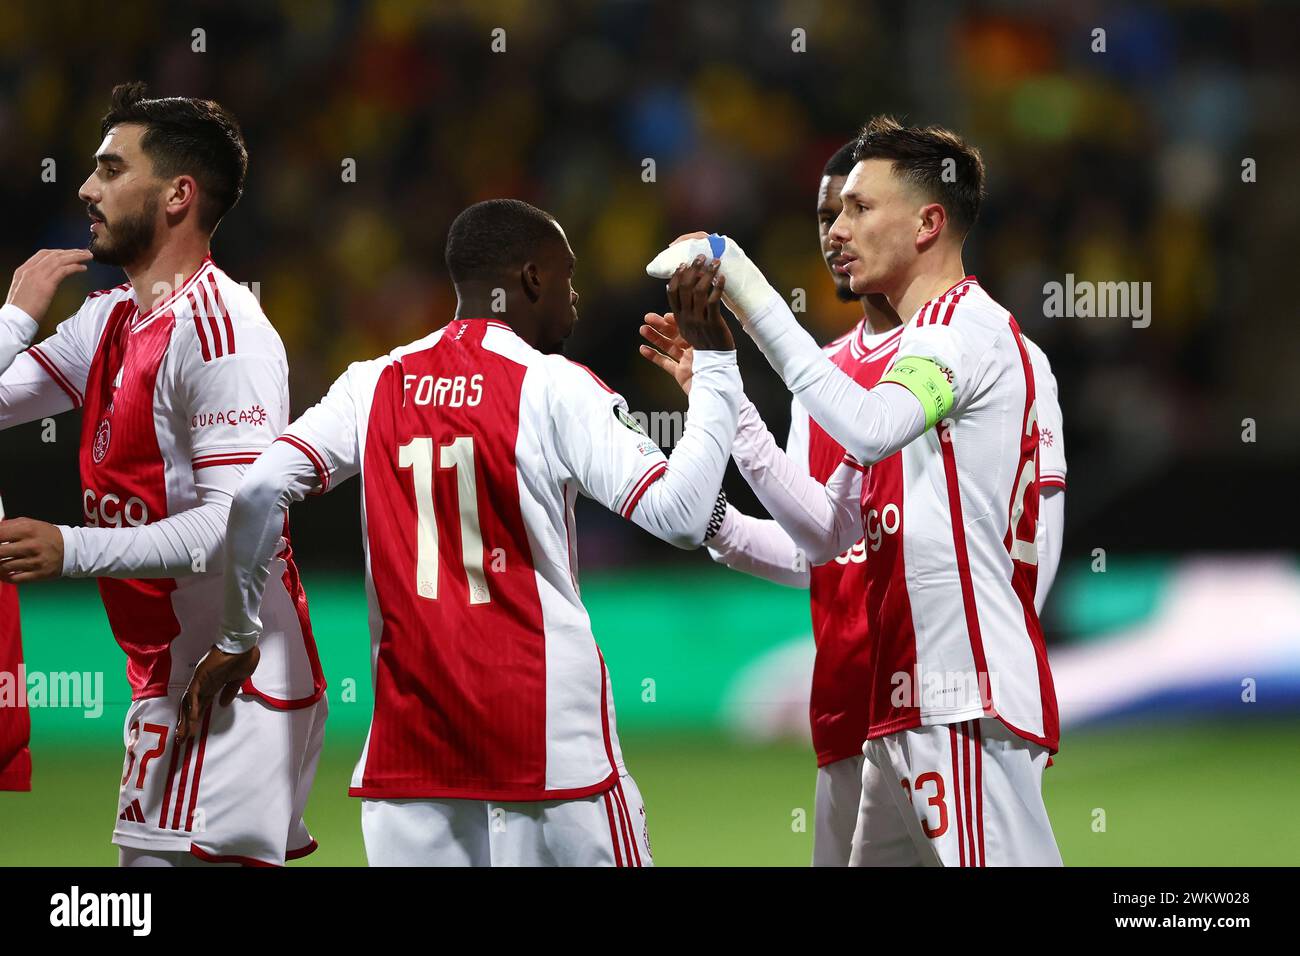 BODØ - (l-r) Josip Sutalo of Ajax, Carlos Forbs of Ajax, Steven Berghuis of Ajax celebrate the 0-1 during the UEFA Conference League play-off match between FK Bodø/Glimt and Ajax Amsterdam at the Aspmyra Stadium on February 22, 2024 in Bodø, Norway. ANP VINCENT JANNINK Stock Photo